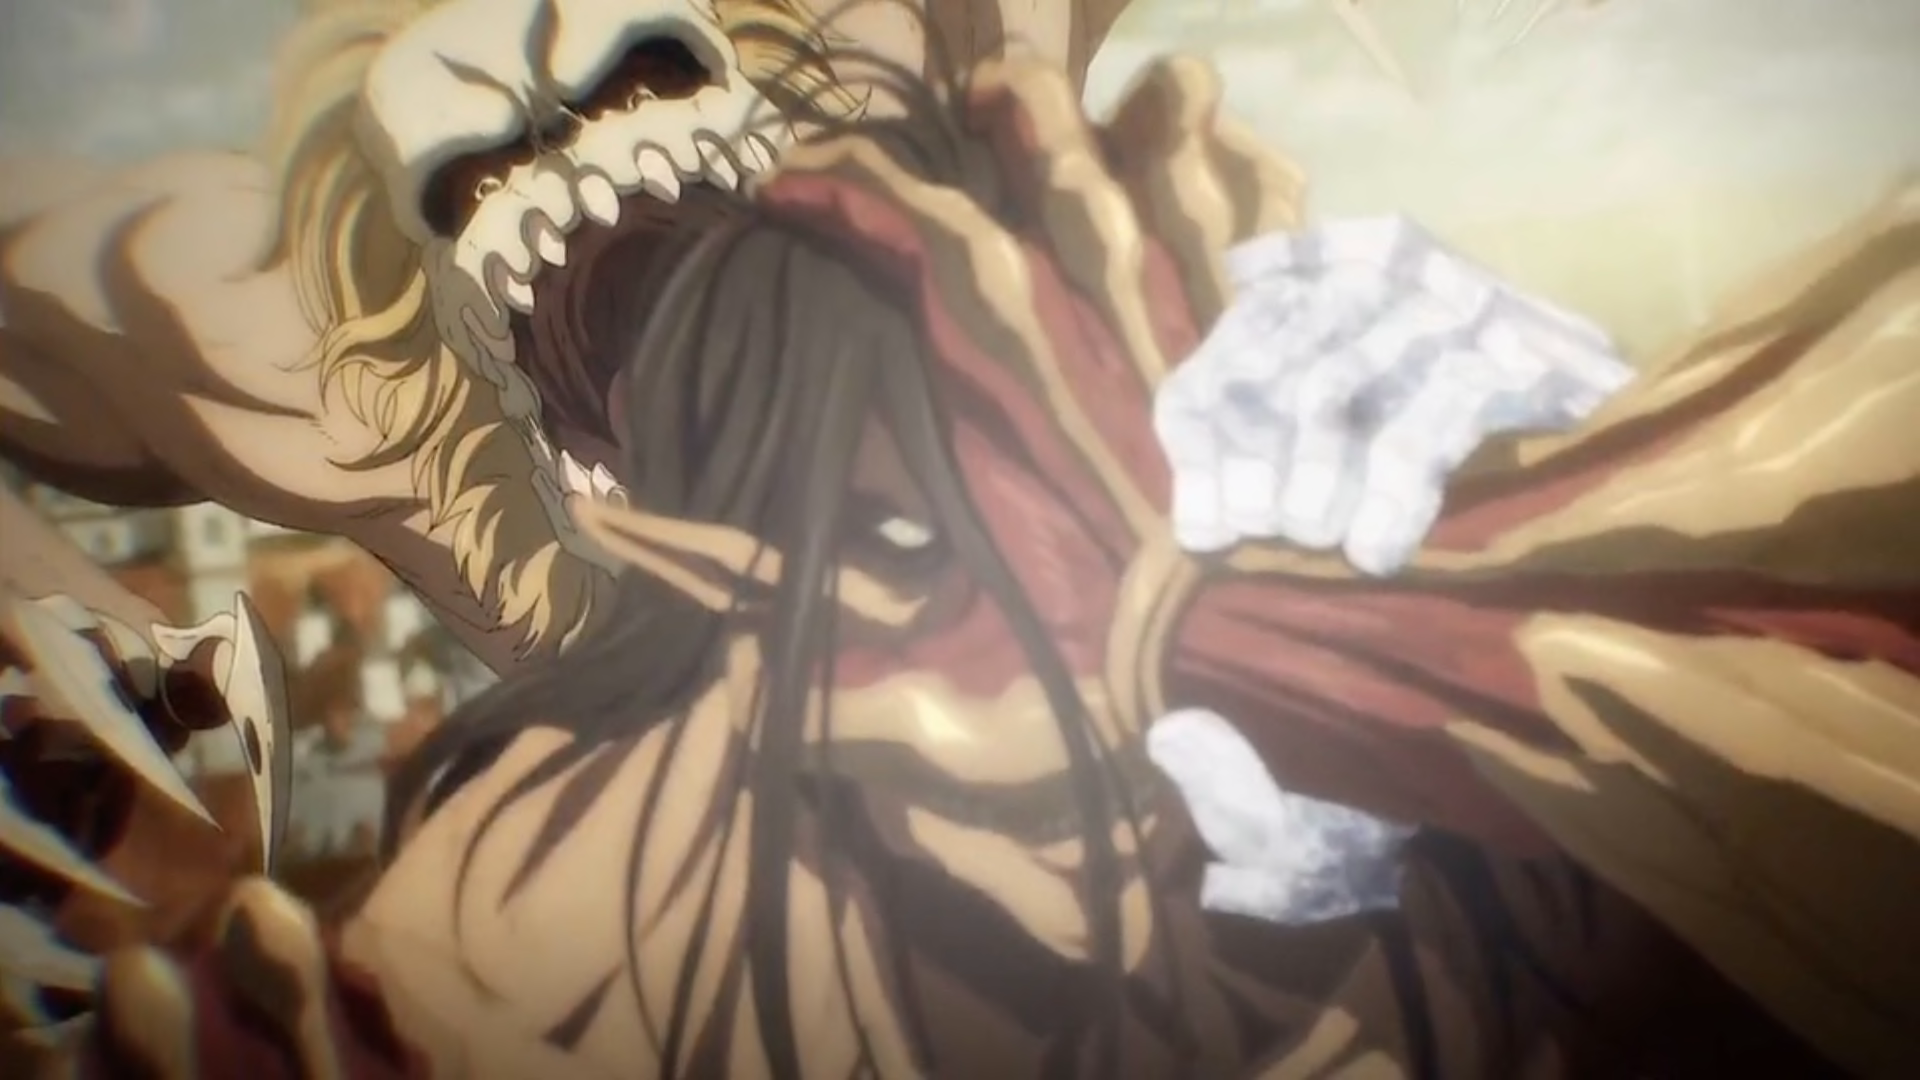 Attack On Titan The Final season part 2 has Become the Highest